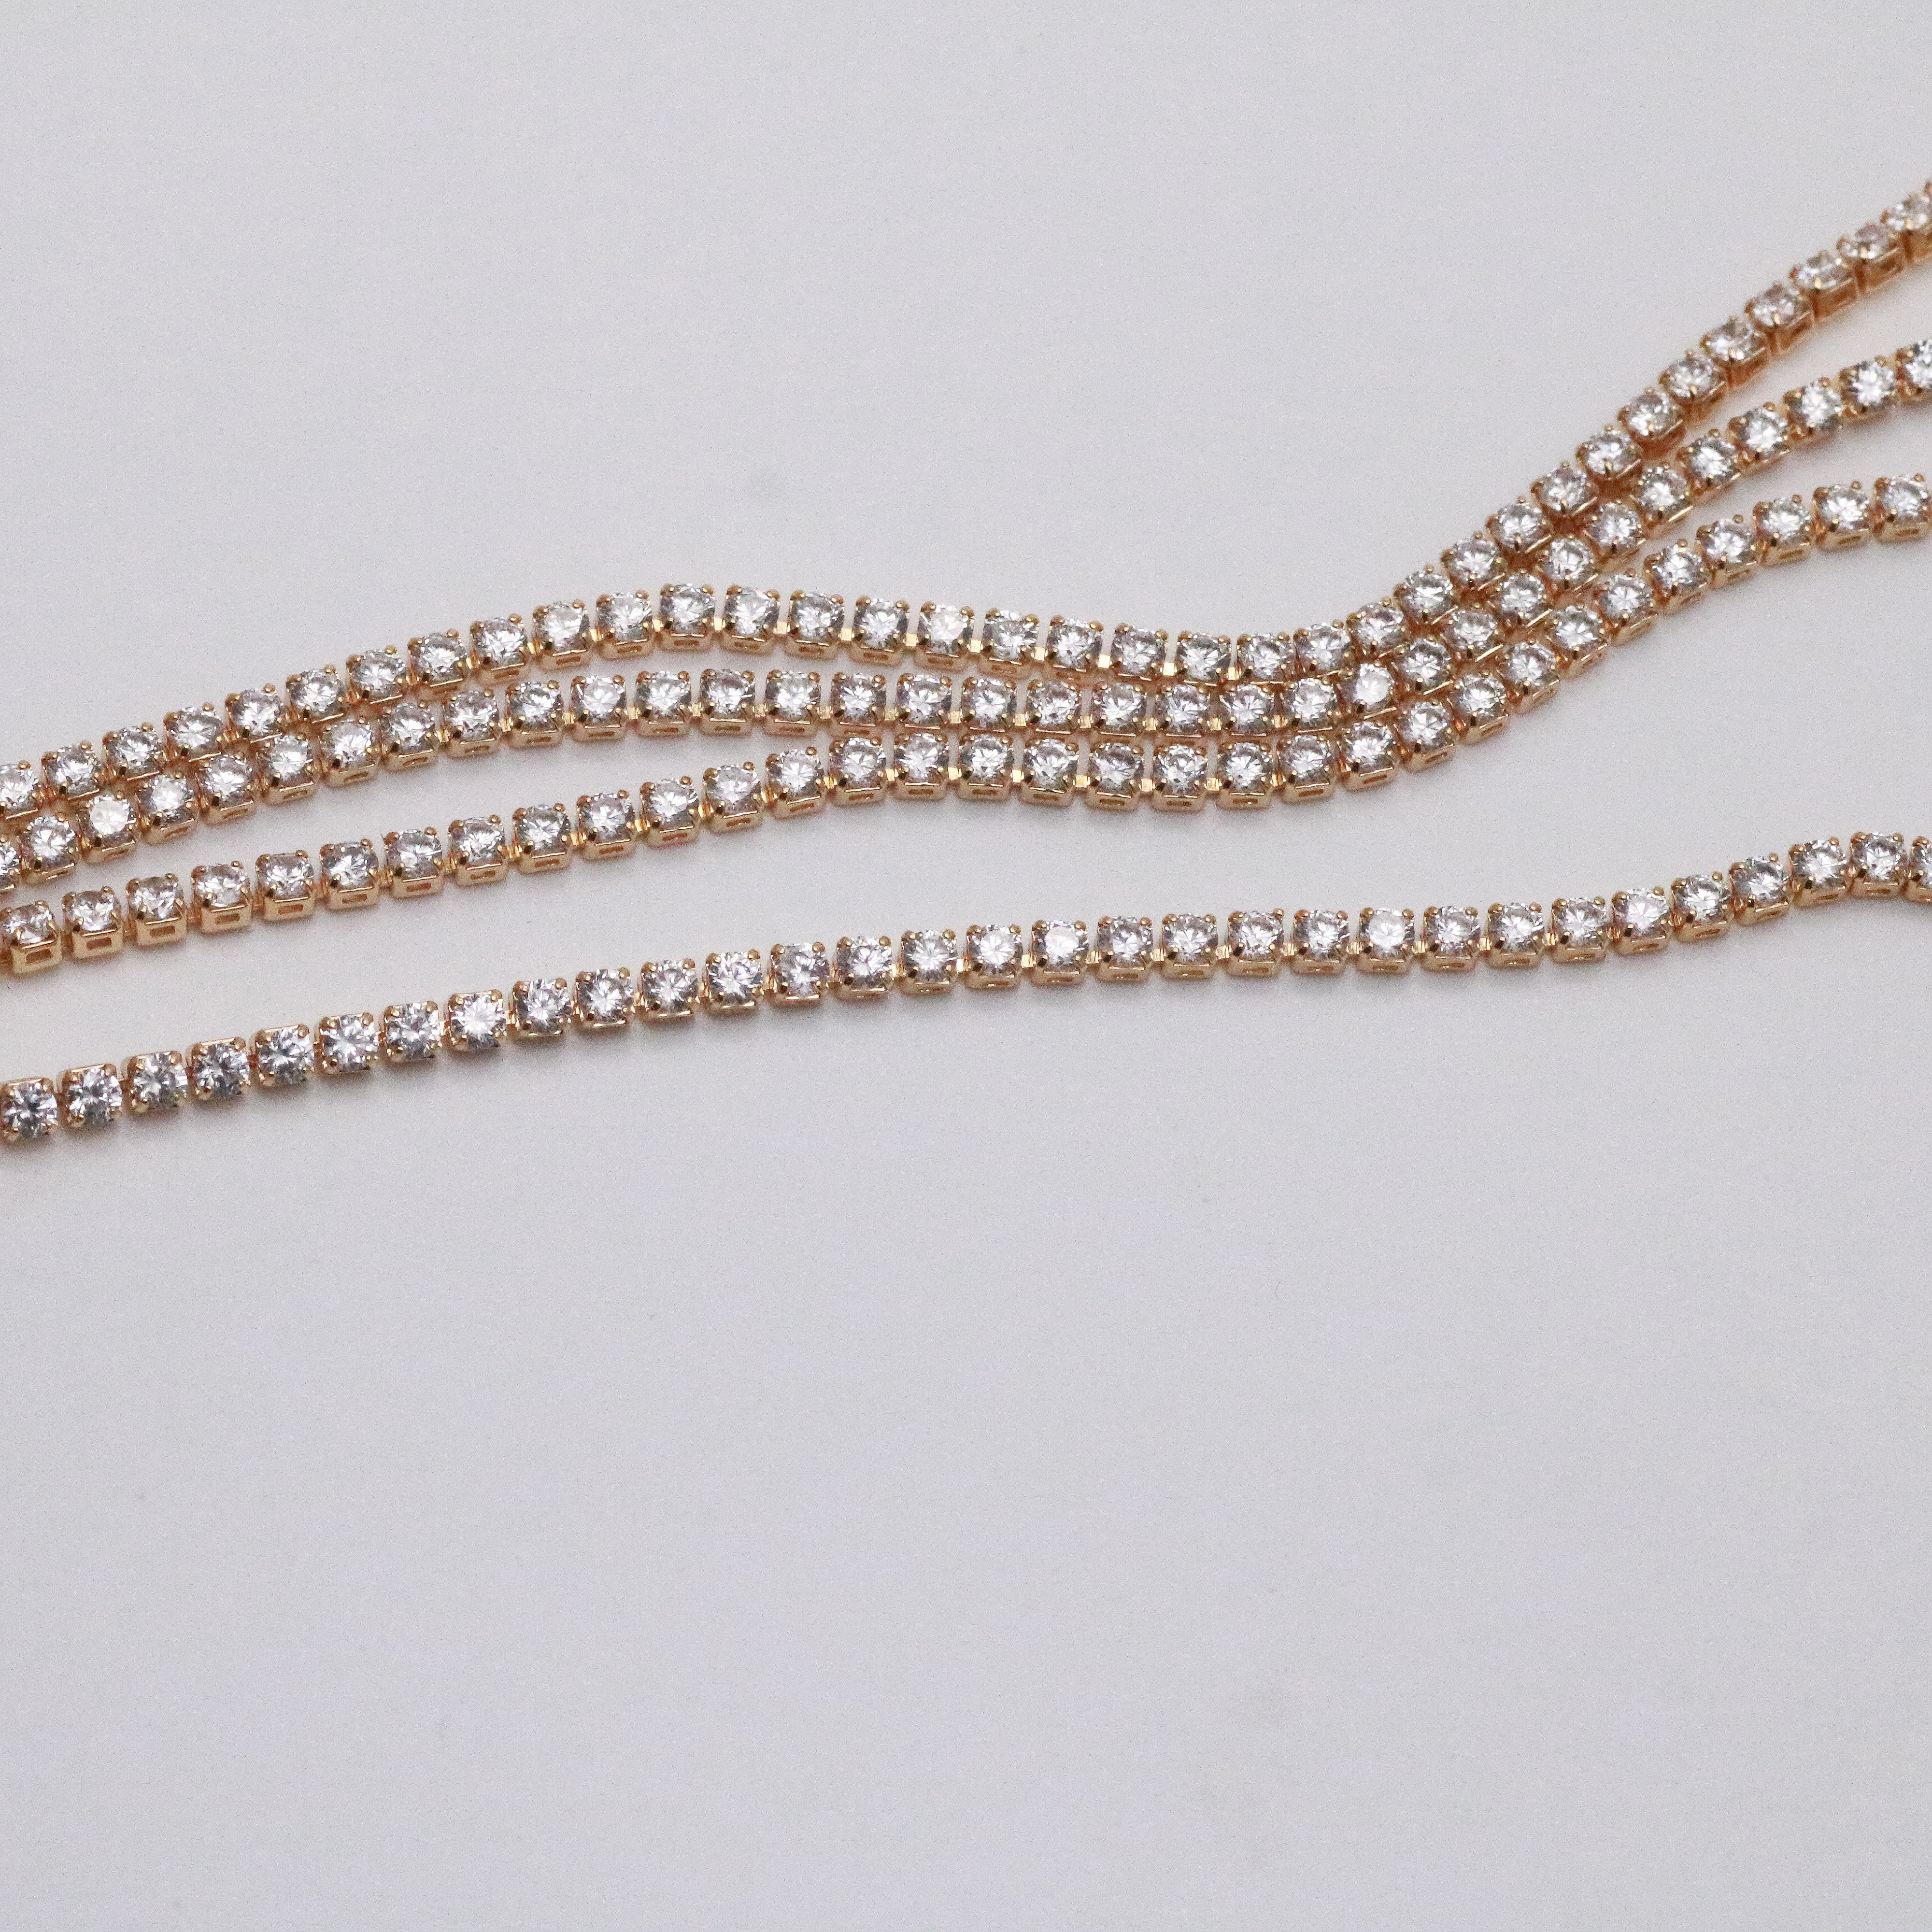 2mm gold tennis necklace